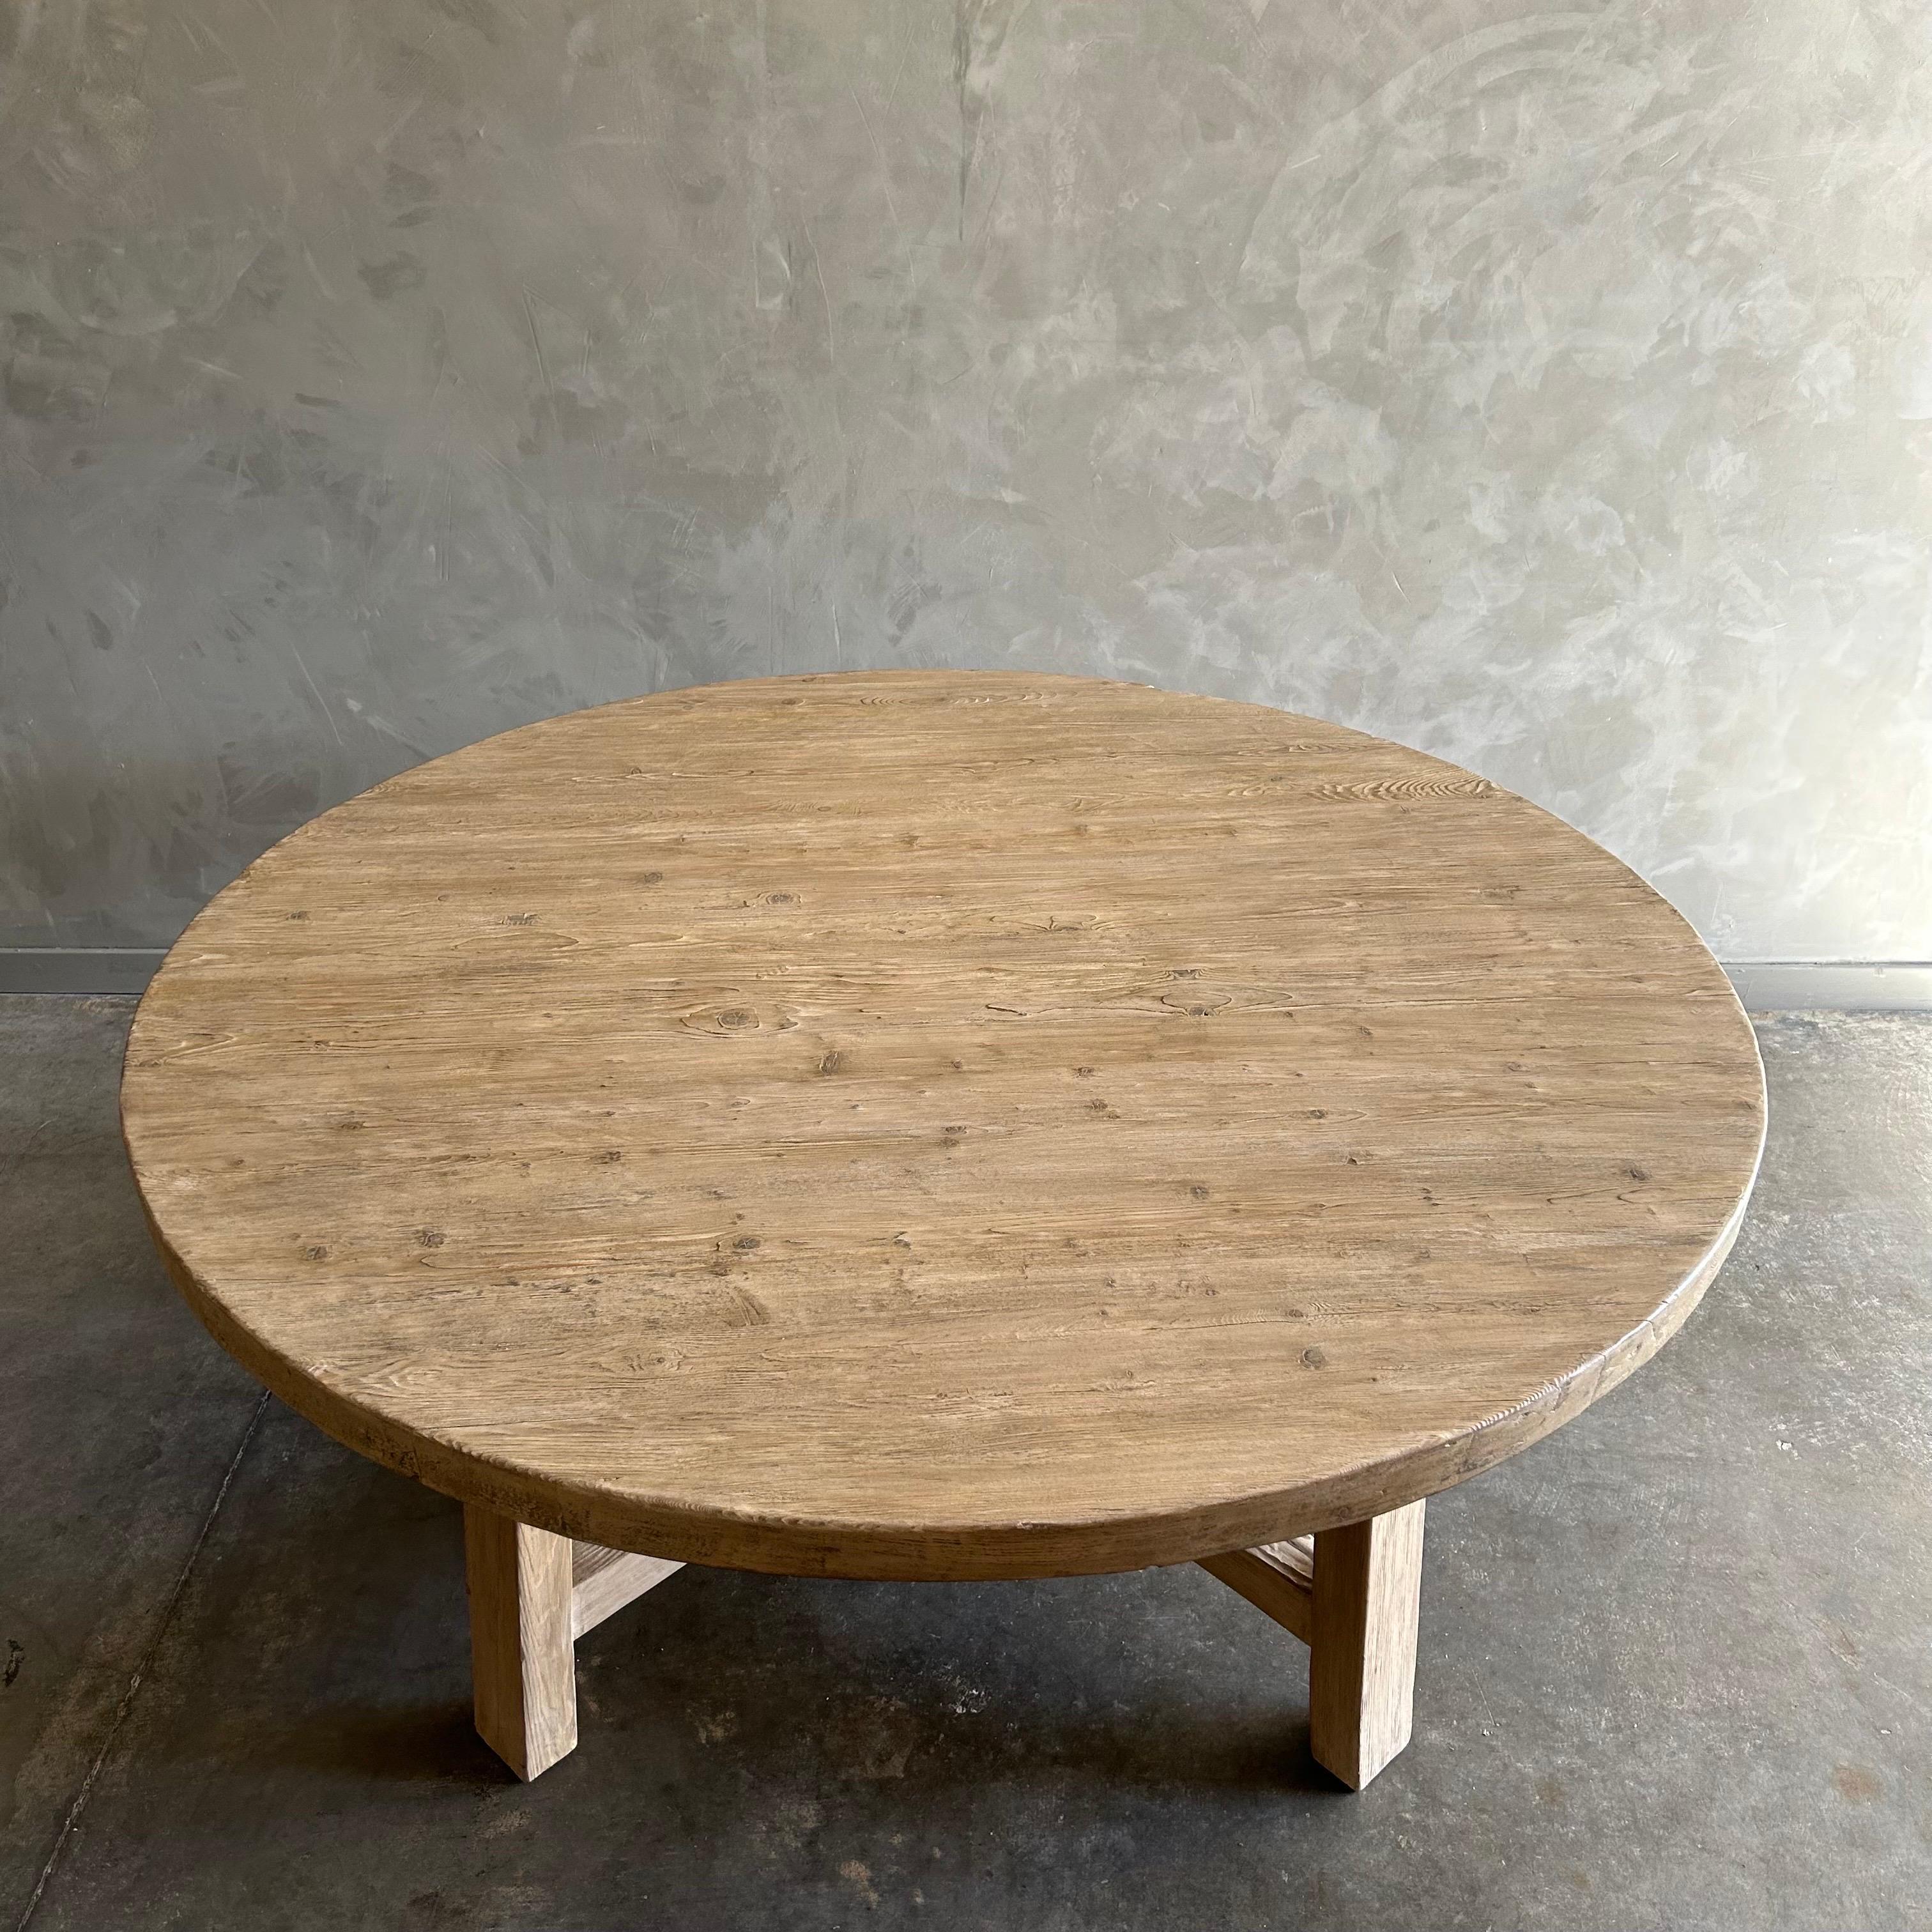 Organic Modern Reclaimed Wood Dining Table in Natural Wood Finish 71